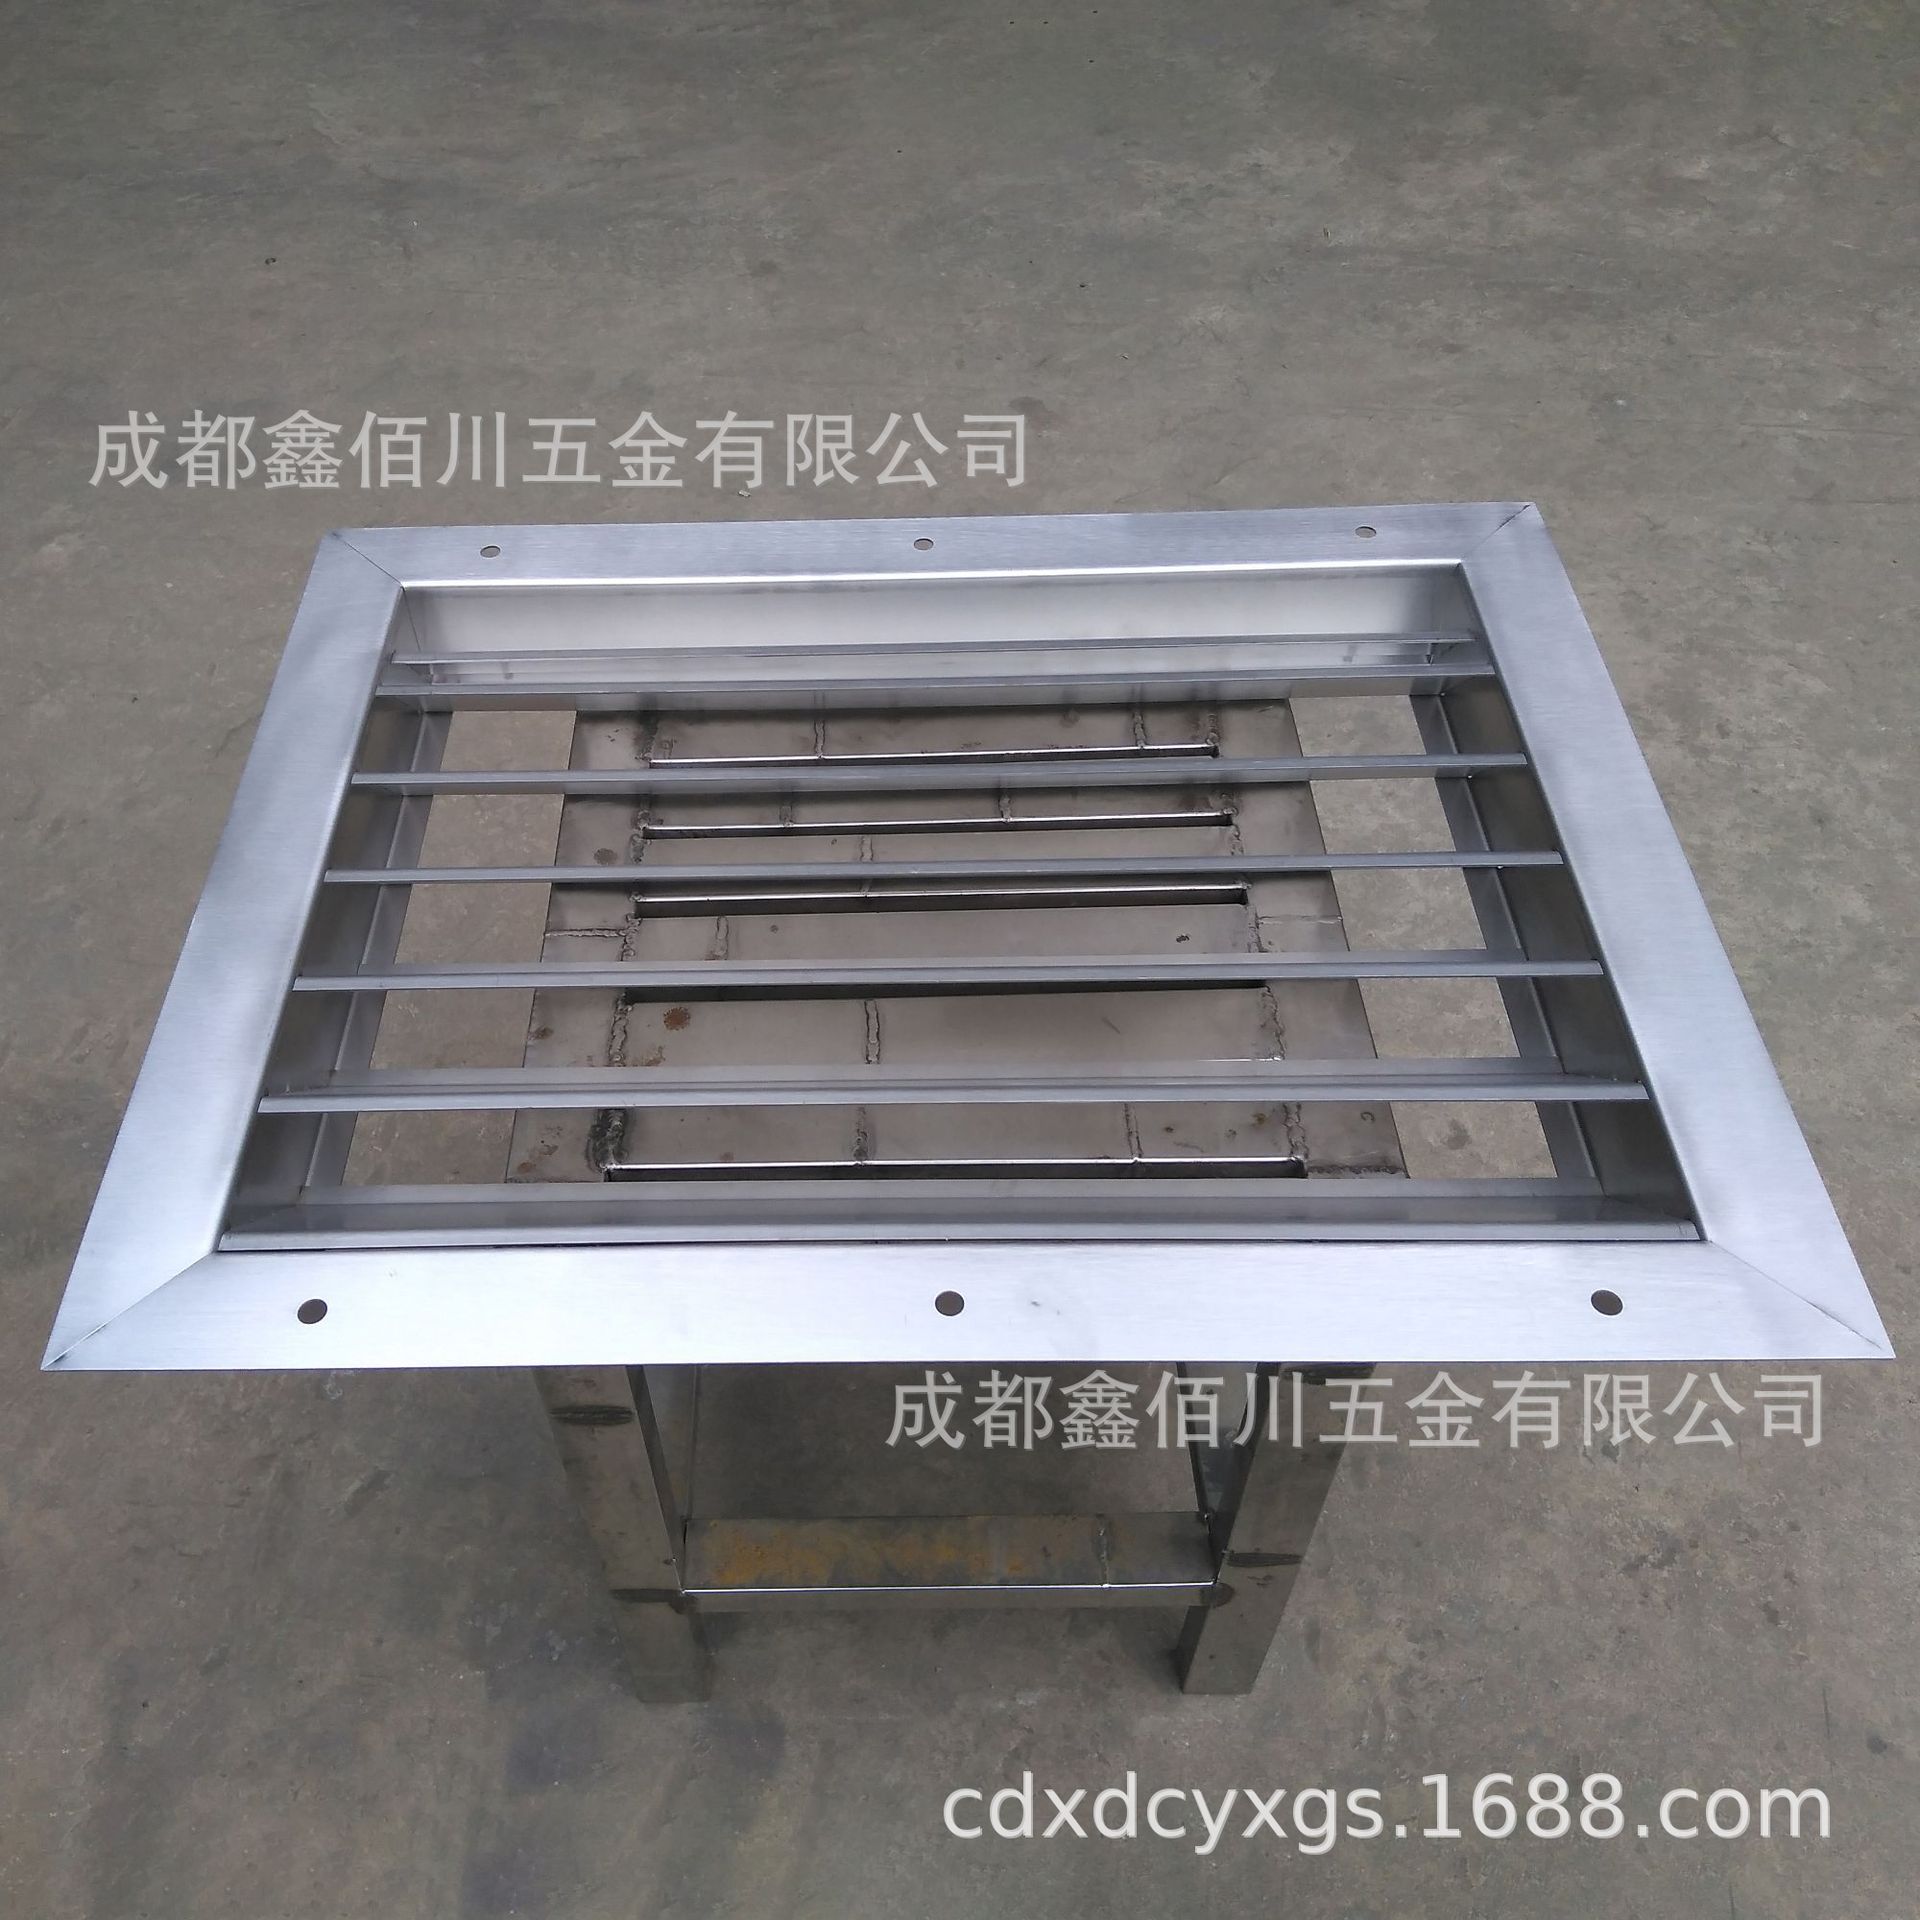 Manufactor Customized high quality Stainless steel Blind Plans to customize